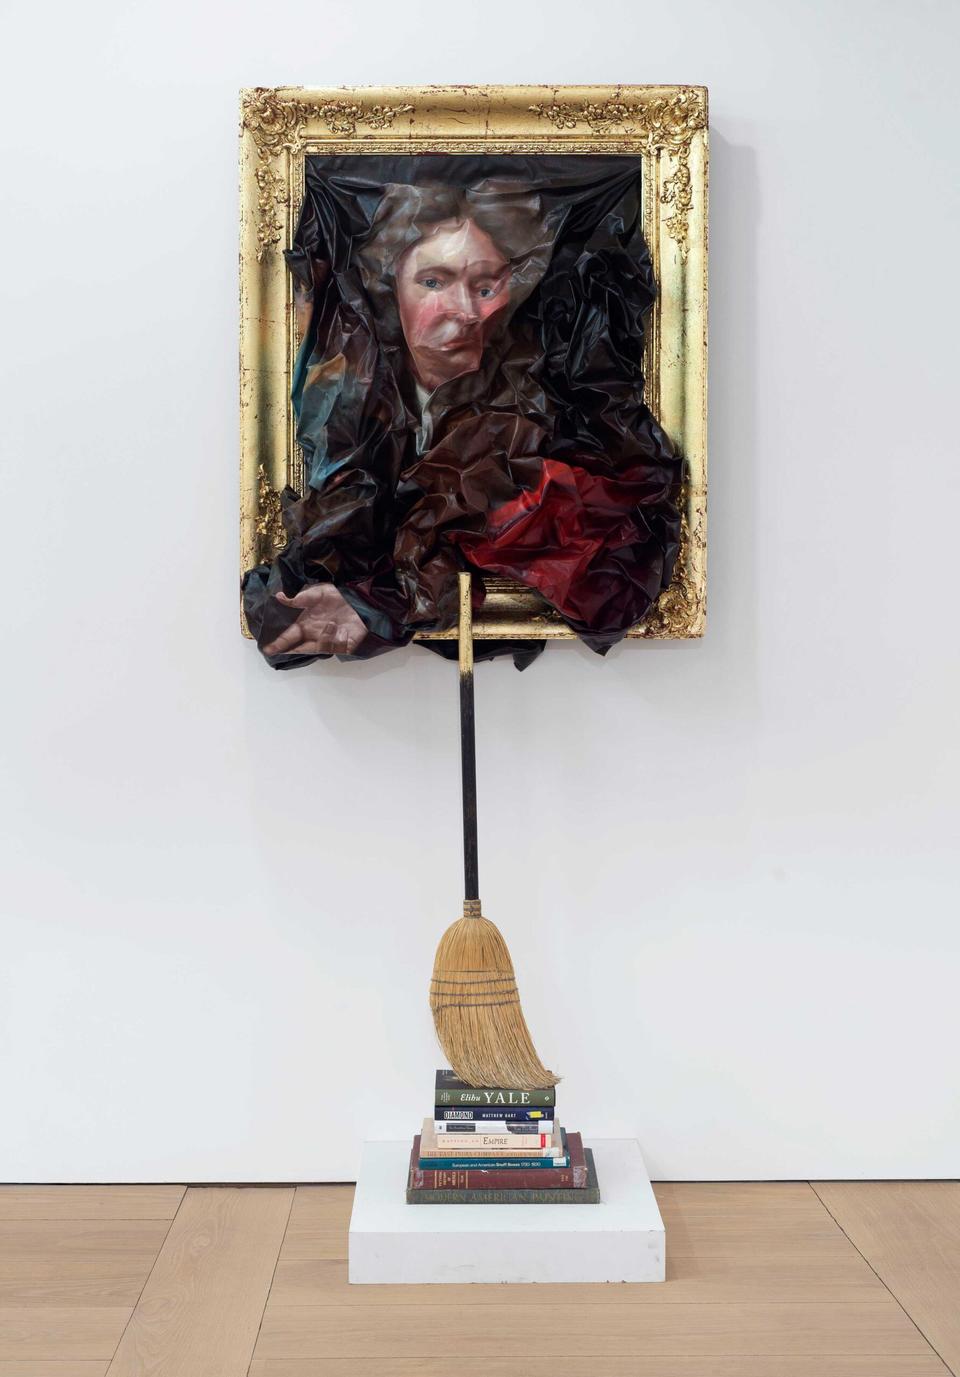 Titus Kaphar's work Unfit Frame features a wrinkled and disfigured canvas of Elihu Yale of Yale University, whereas below the painting is a stack of books which emphasize Yale's history and fortune. The books prop up a straw broom which leans against the frame of the canvas above. 